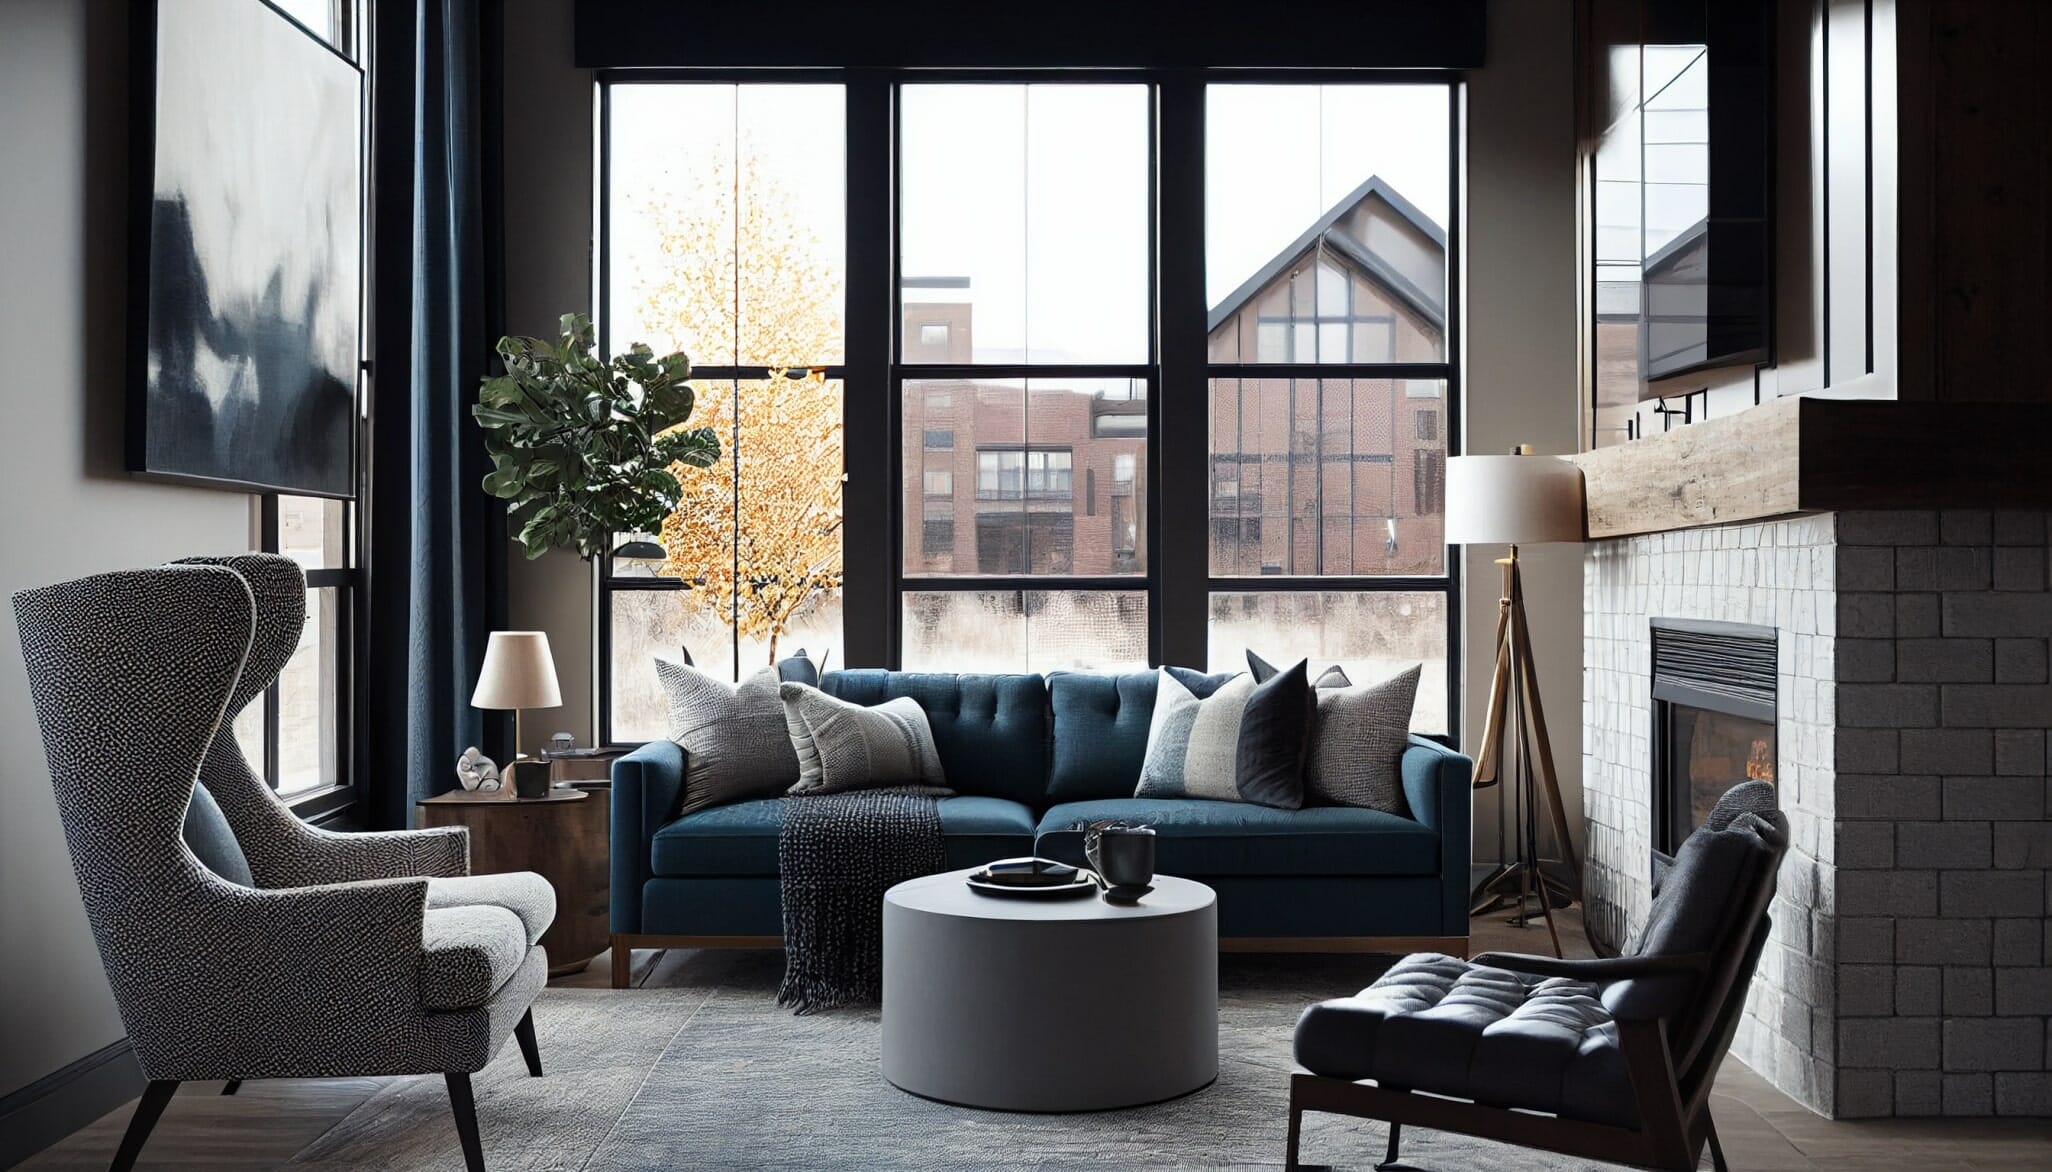 Masculine interior with blue accents